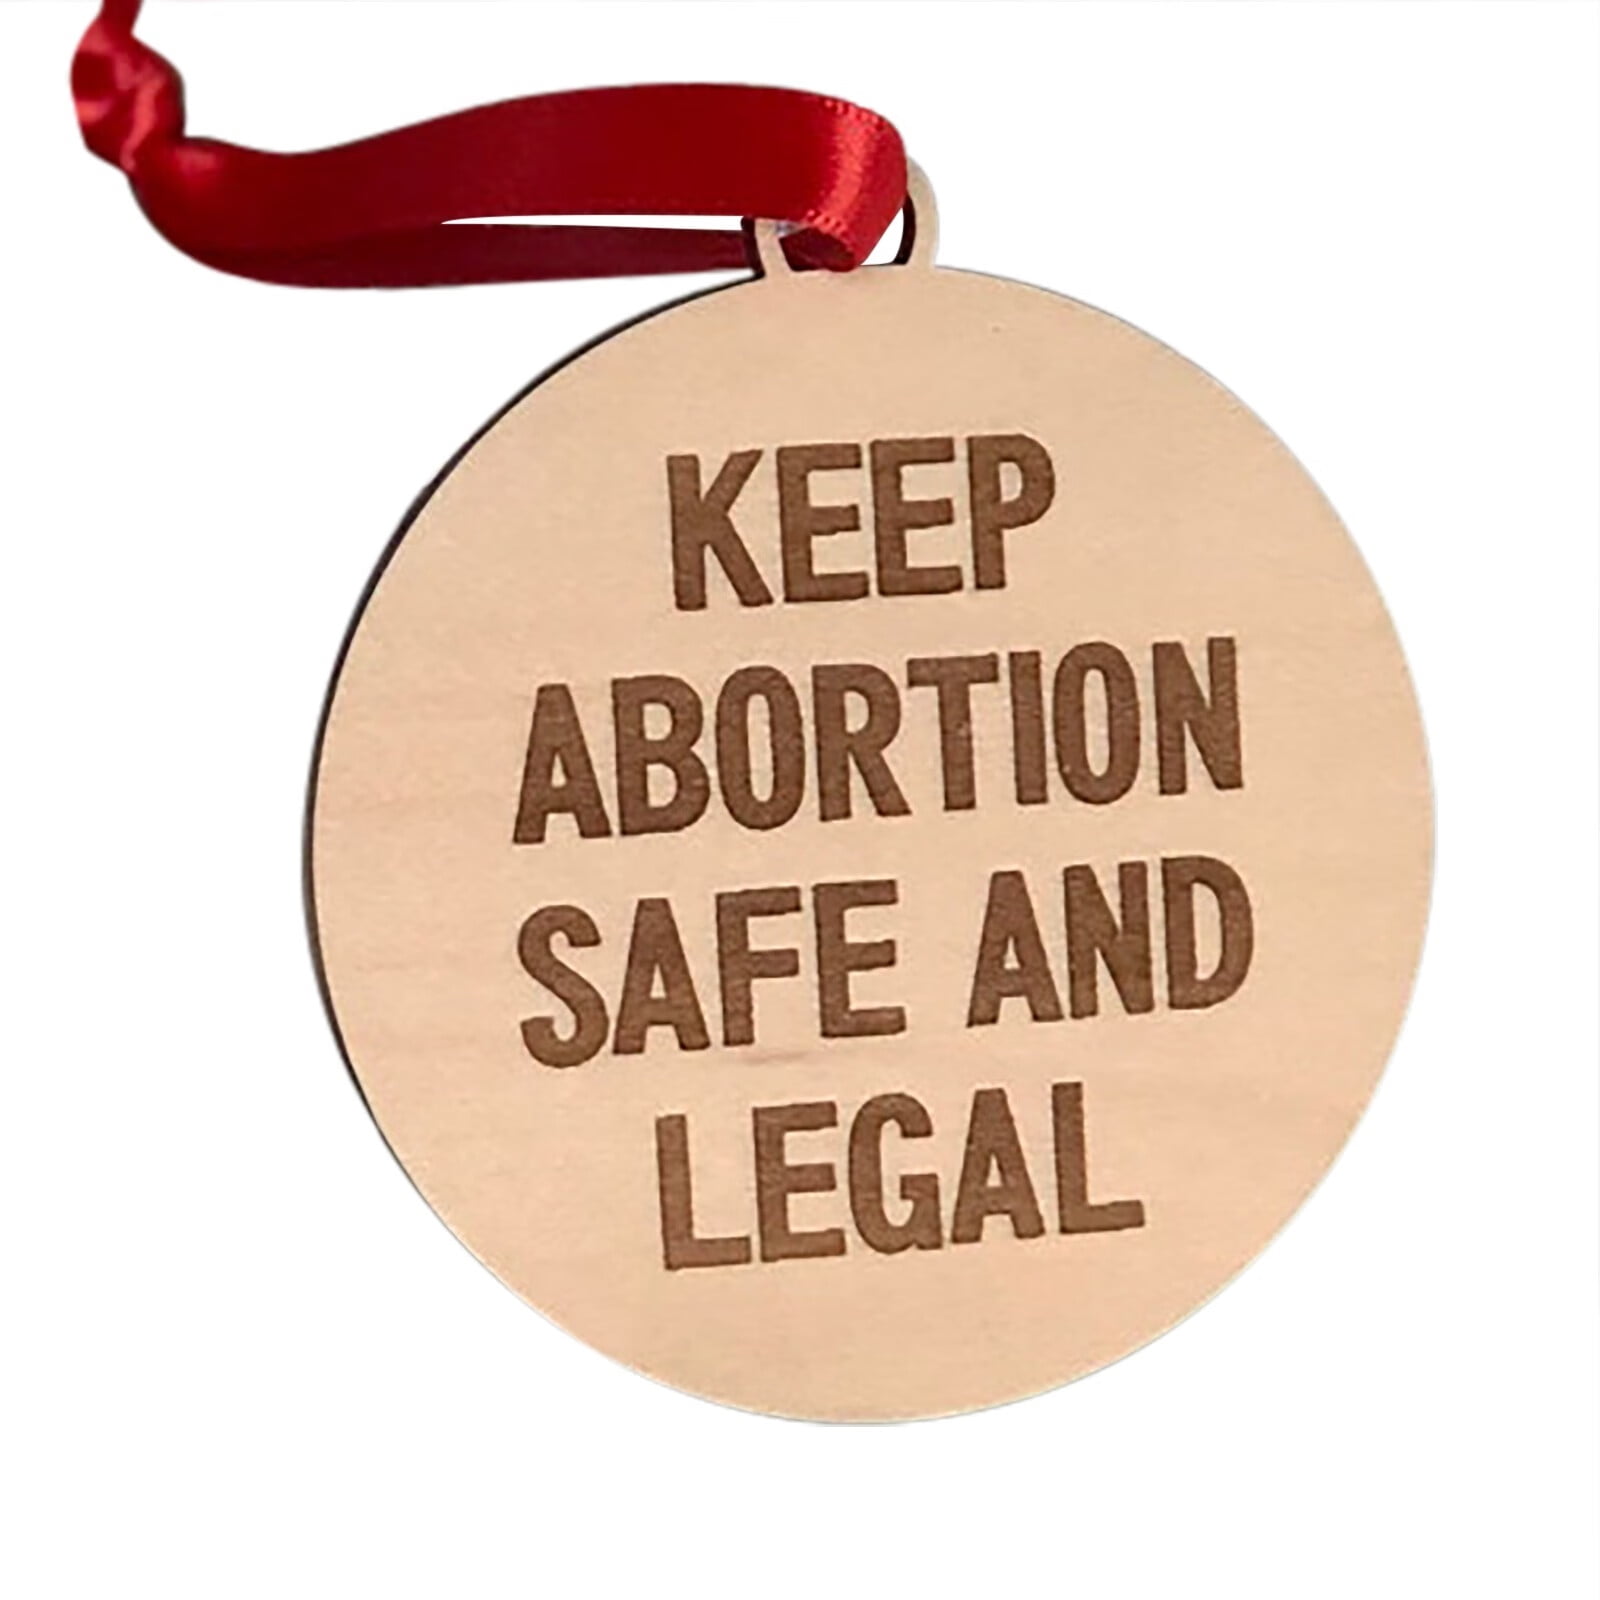 My Body My Choice Jewelry Wooden Pendant Decorative Jewelry Reproductive Rights Jewelry Feminism Gifts 